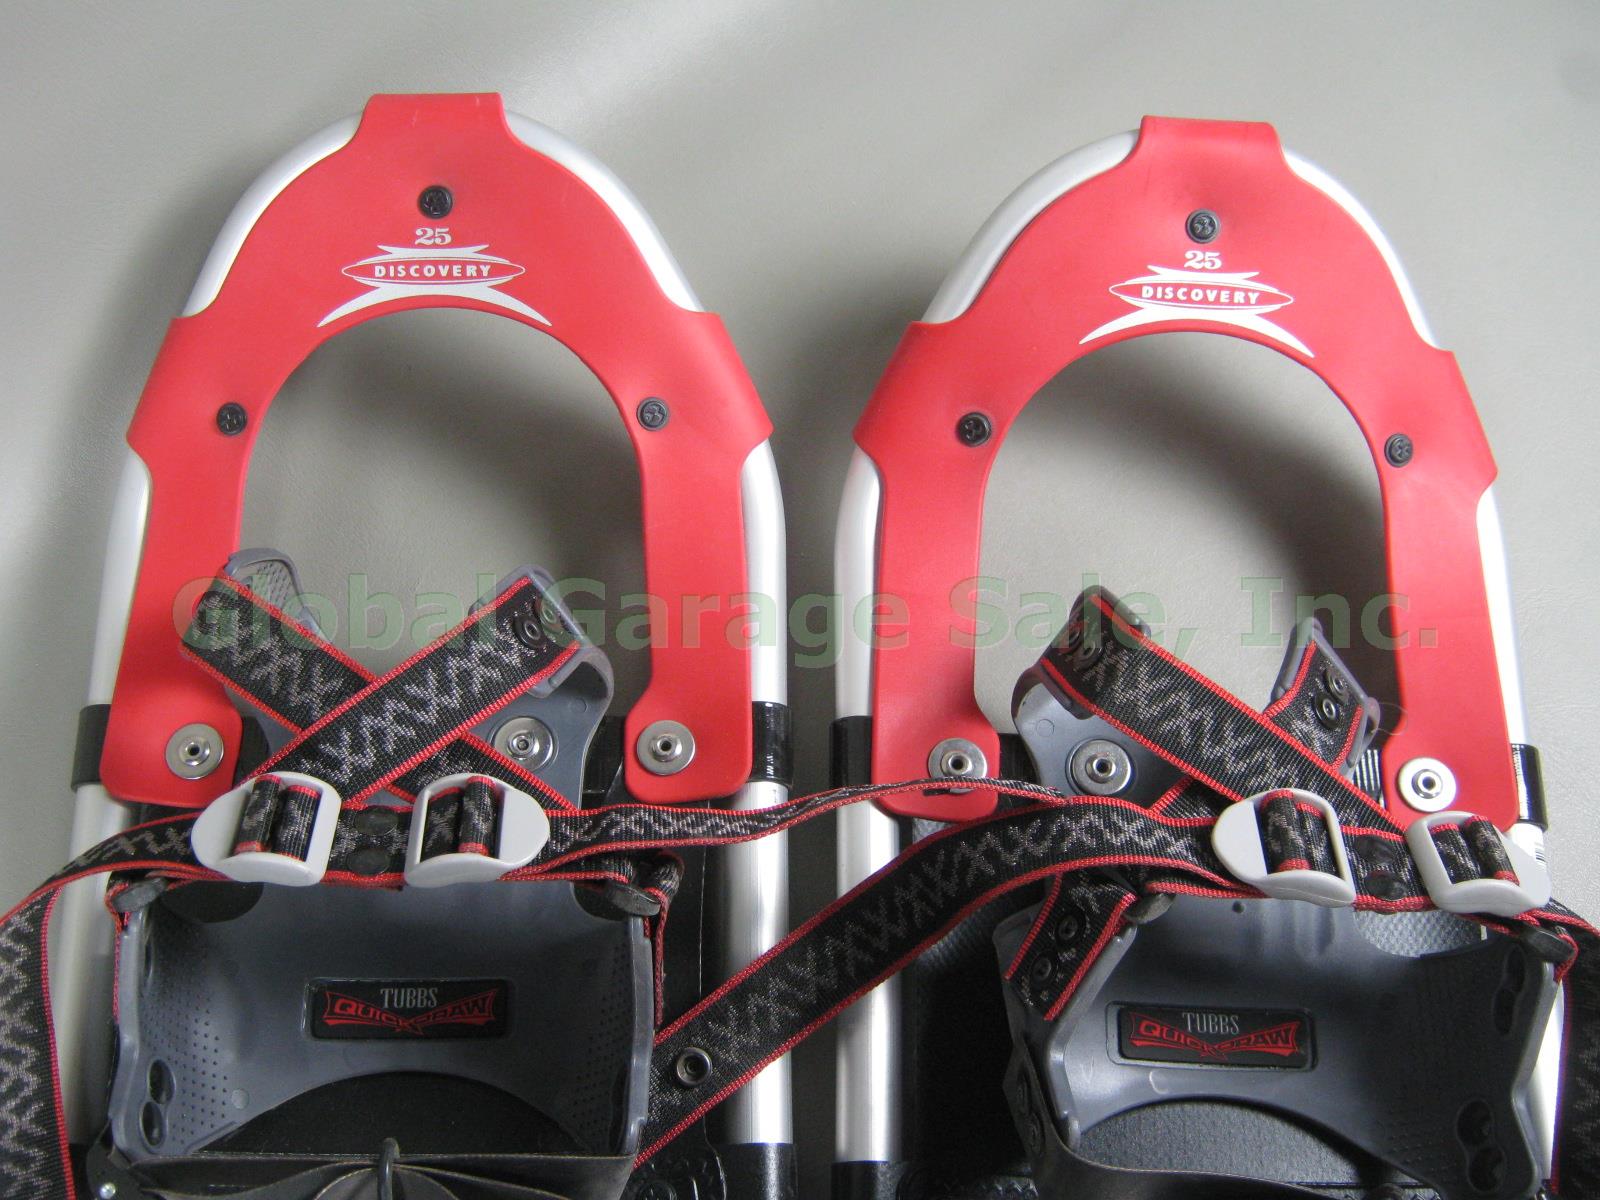 Tubbs Discovery 25 Snowshoes Quick Draw Bindings Excellent Condition! No Reserve 1